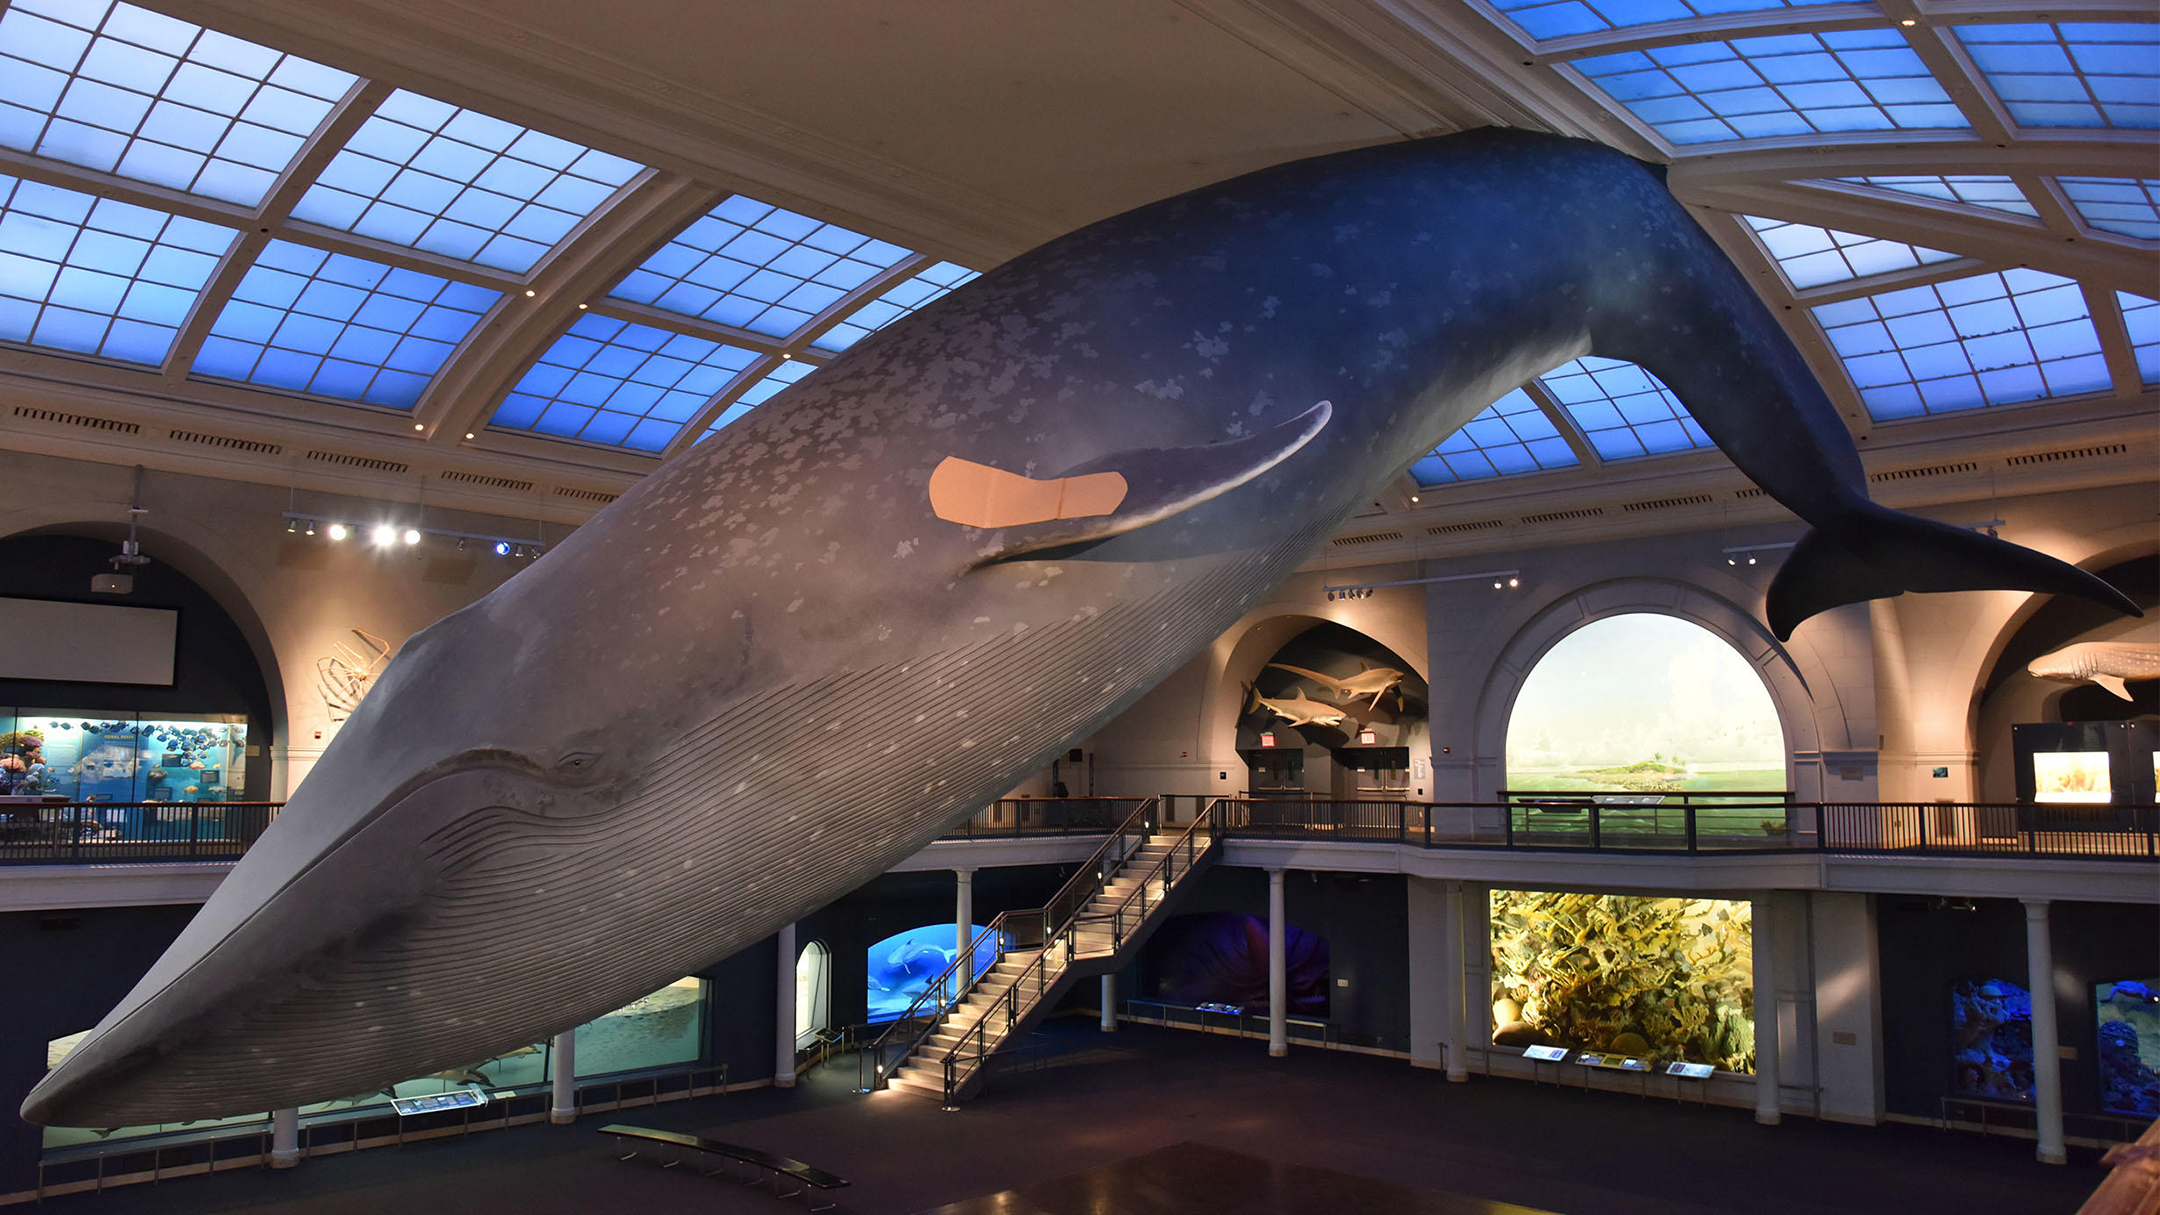 Photo of a blue whale model suspended over an exhibition hall at AMNH